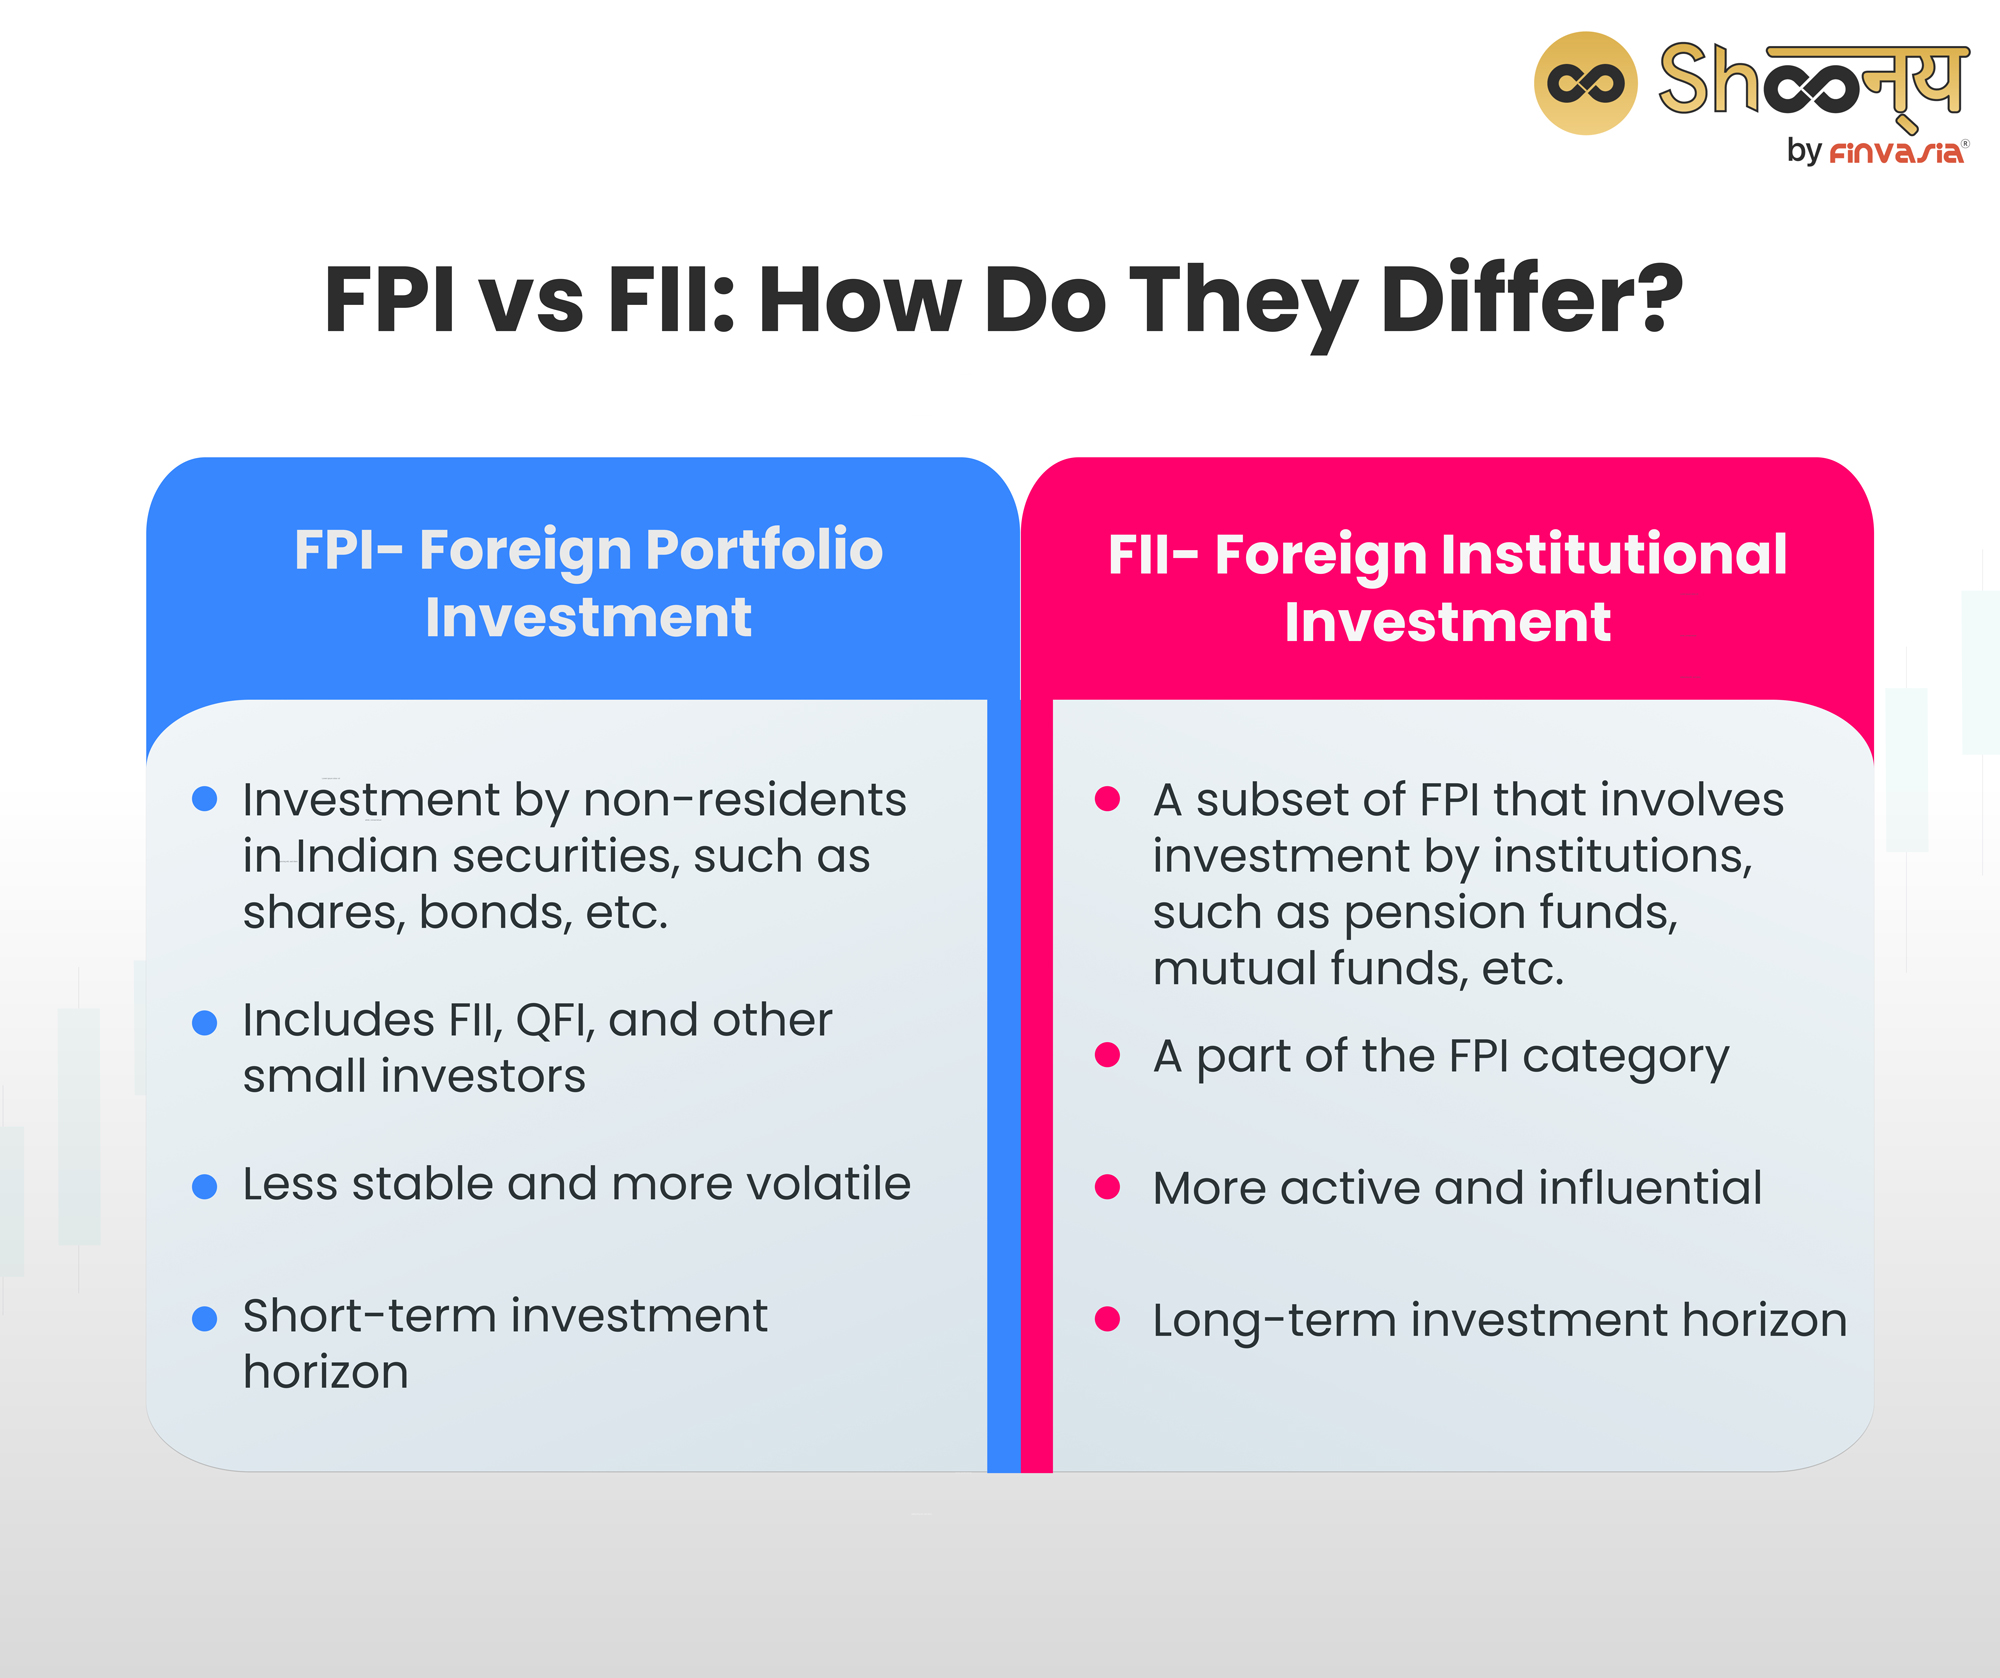 FPI vs FII: How Do They Differ?
